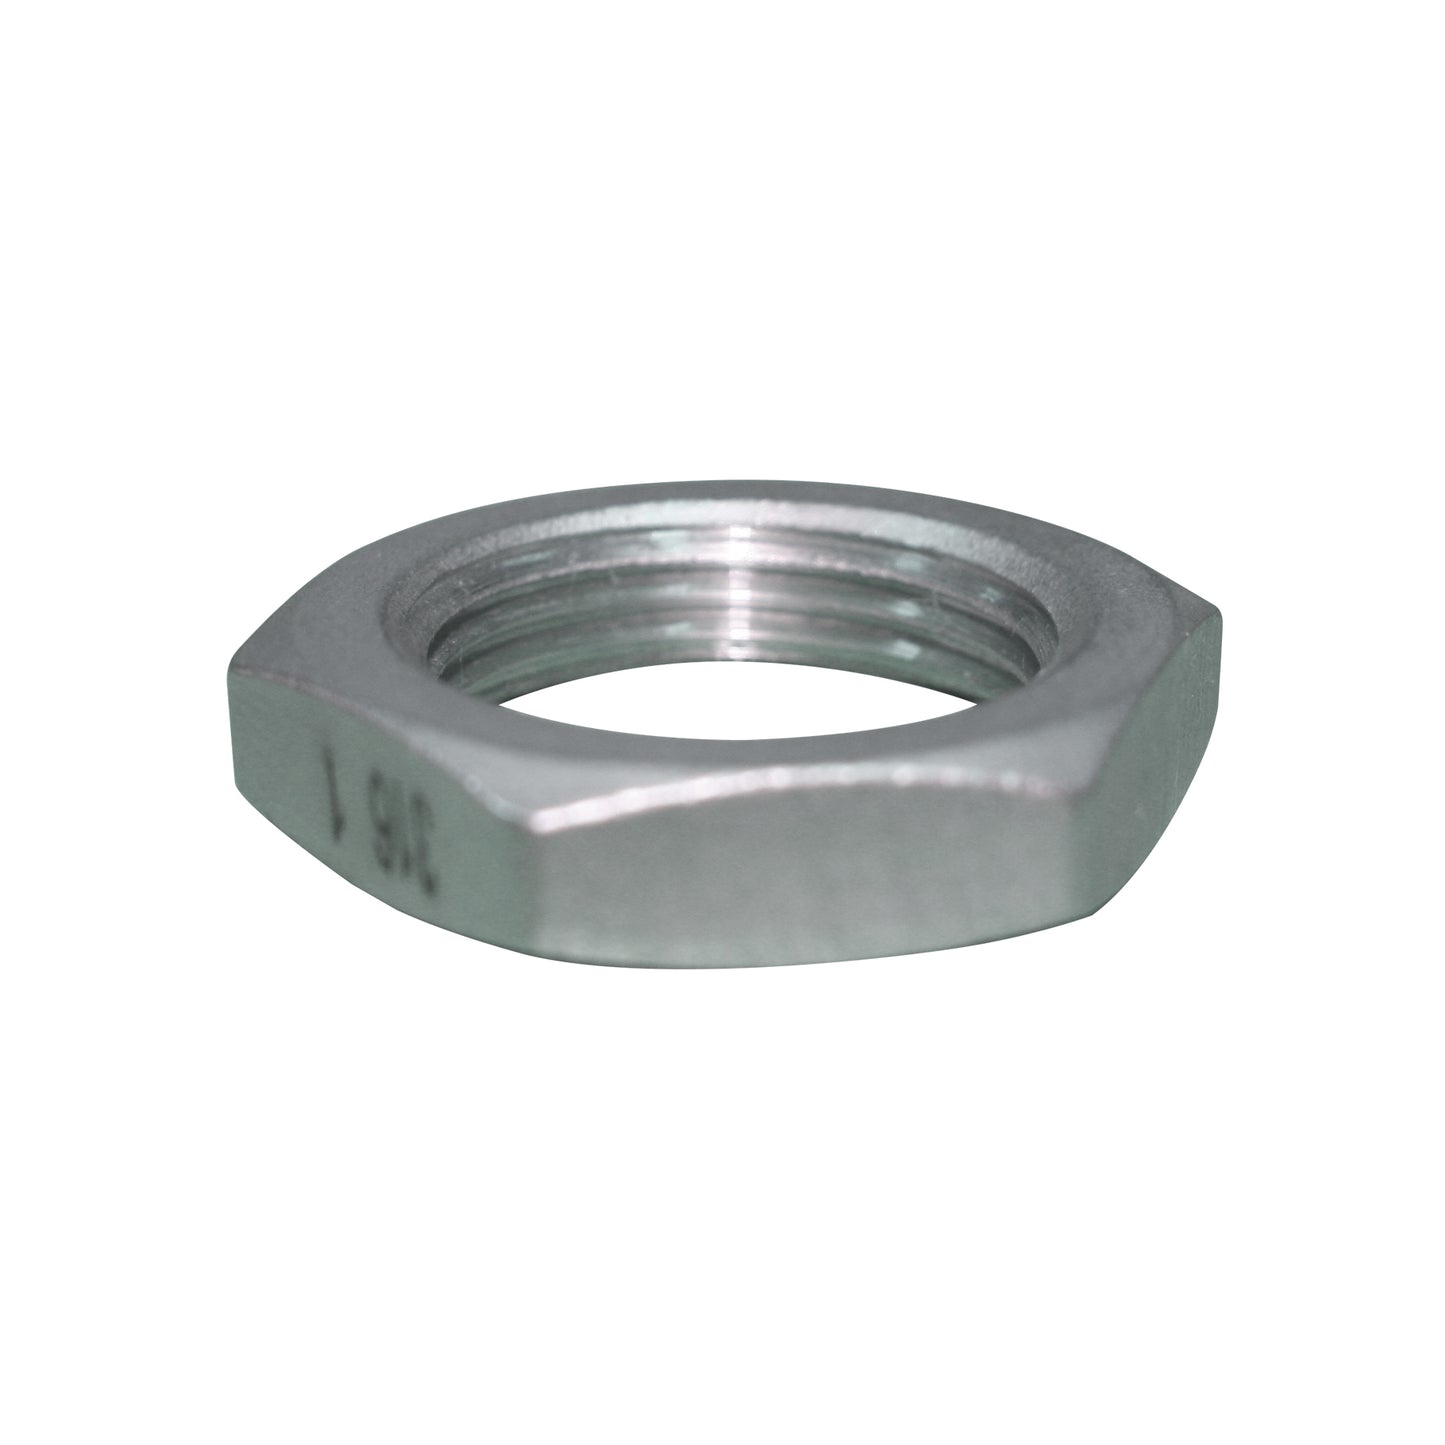 2 stainless steel back nut ss150